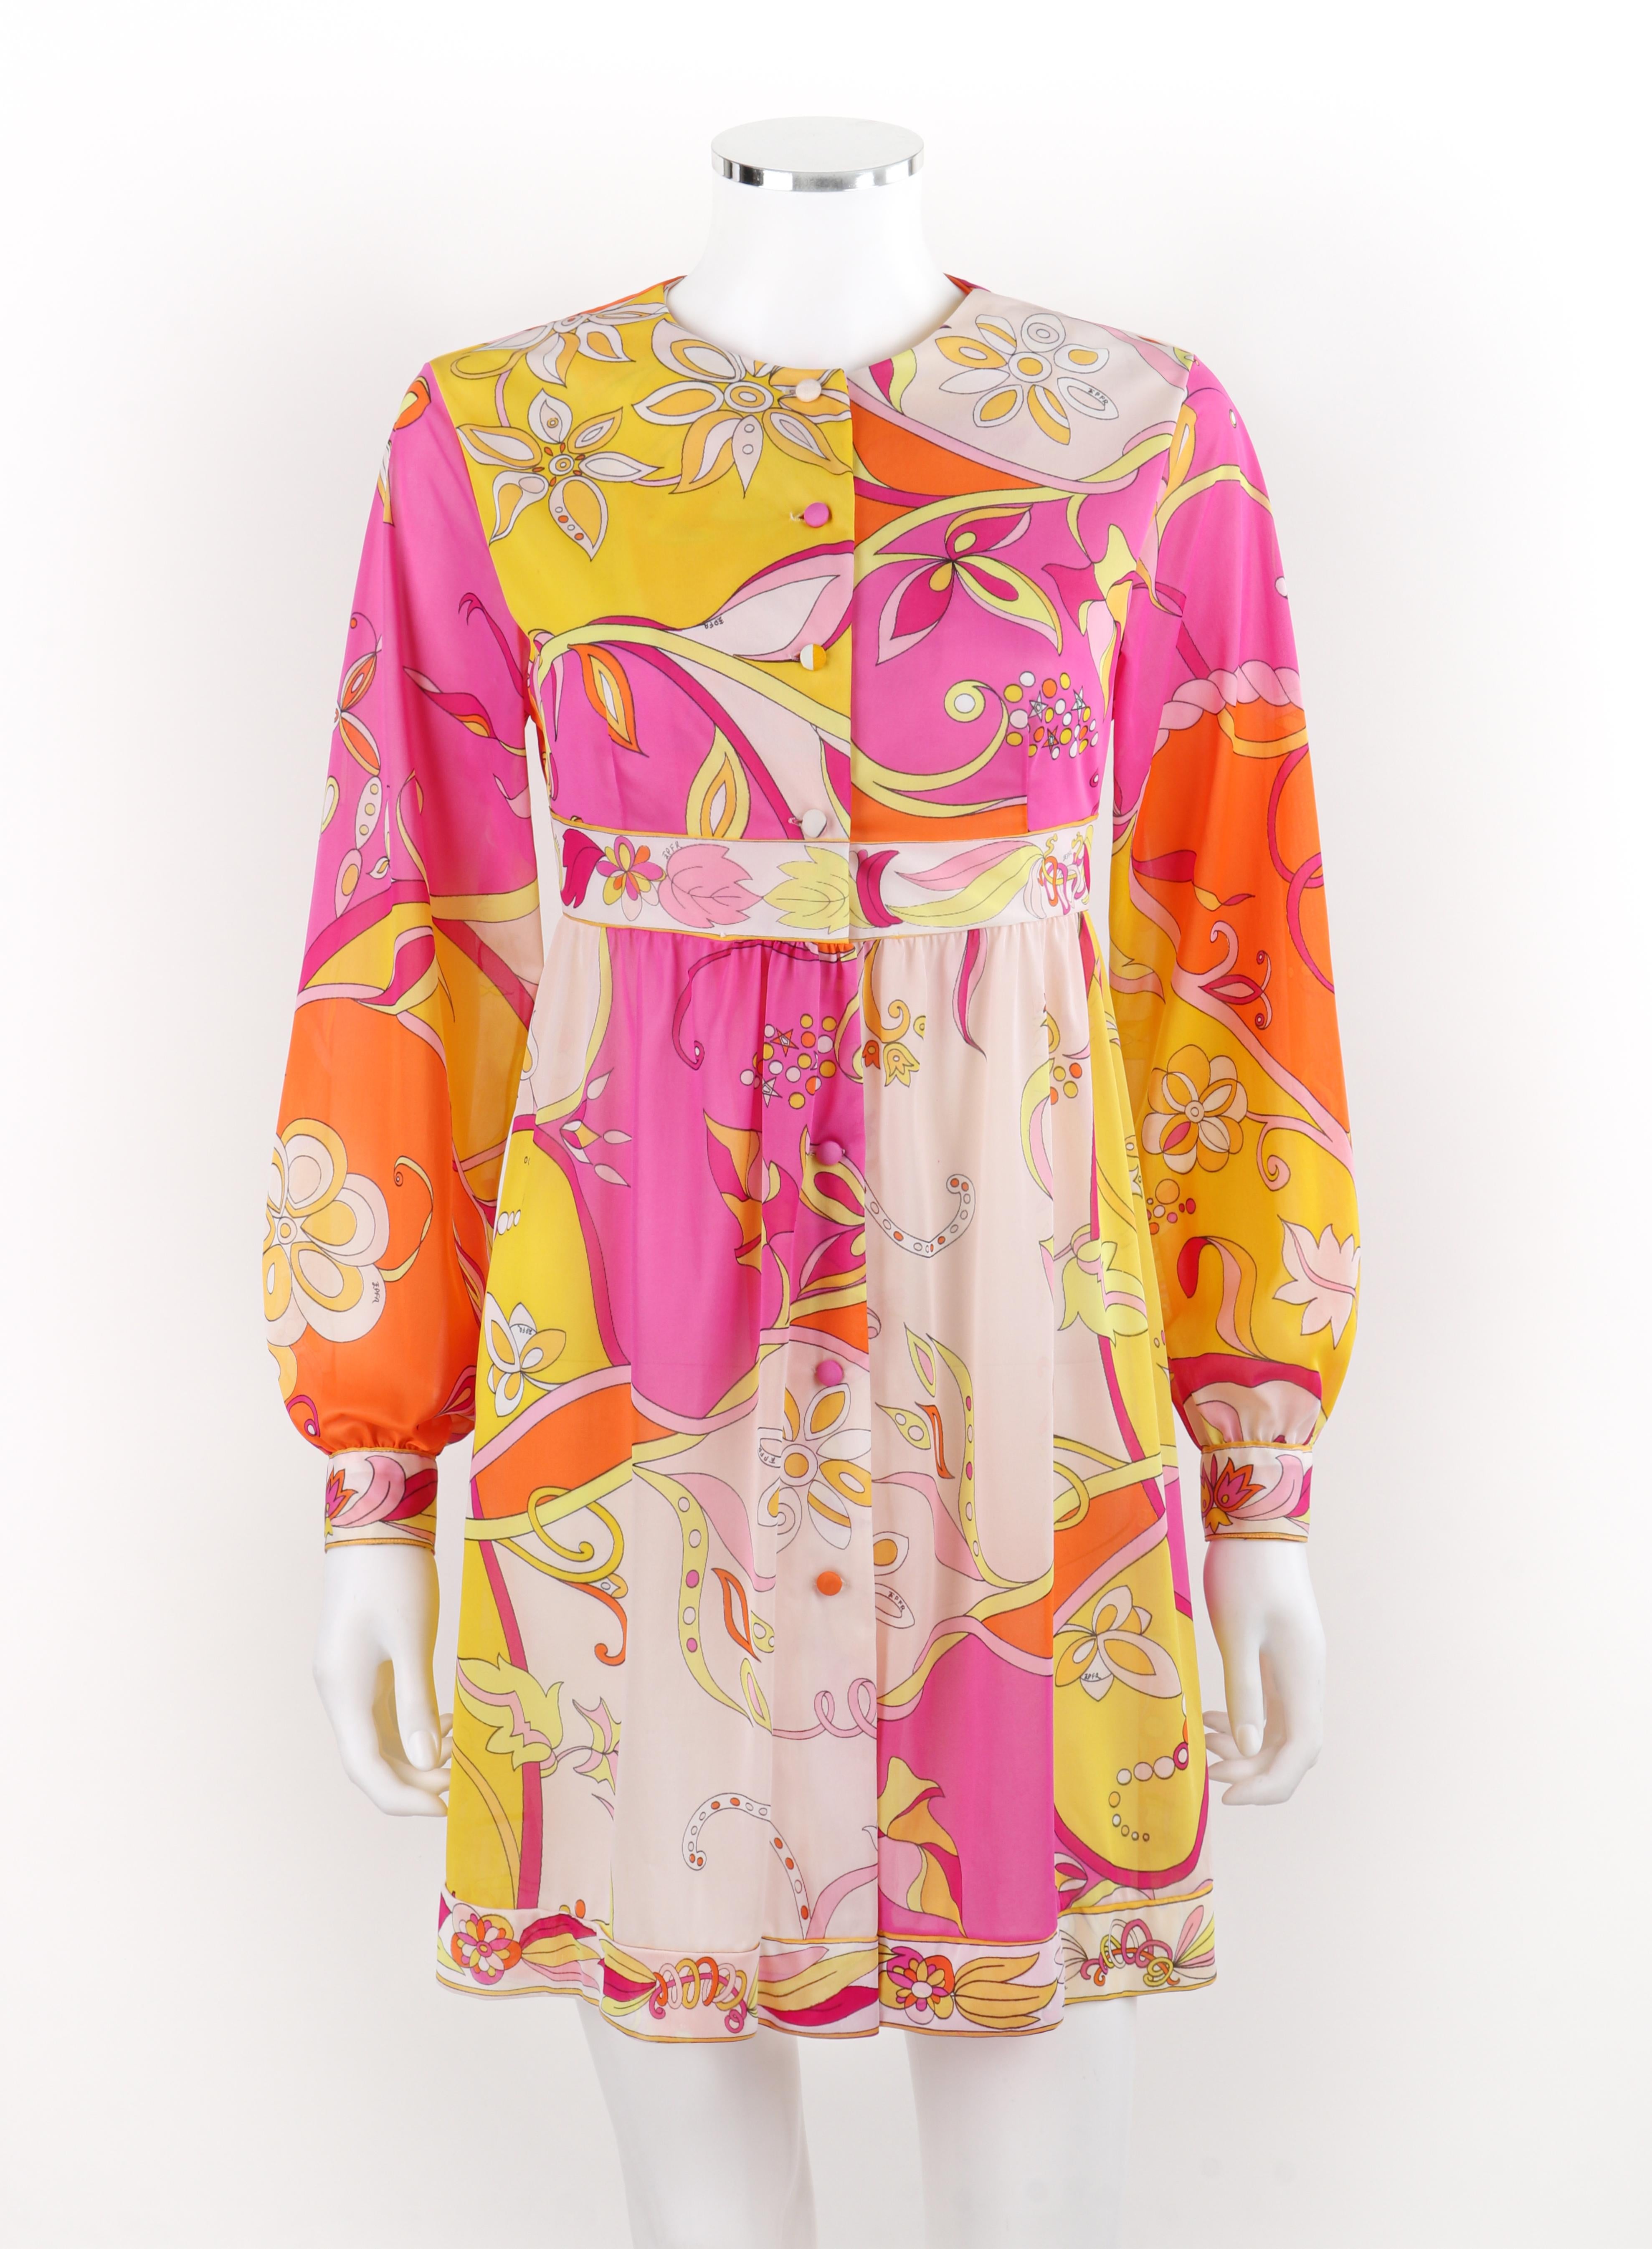 Brand / Manufacturer: Emilio Pucci
Circa: 1970s
Designer: Emilio Pucci
Style: Babydoll dress
Color(s): Shades of pink, yellow, orange, white
Lined: No
Unmarked Fabric Content (feel of): Silk (primary fabric), metal (hardware)
Additional Details /